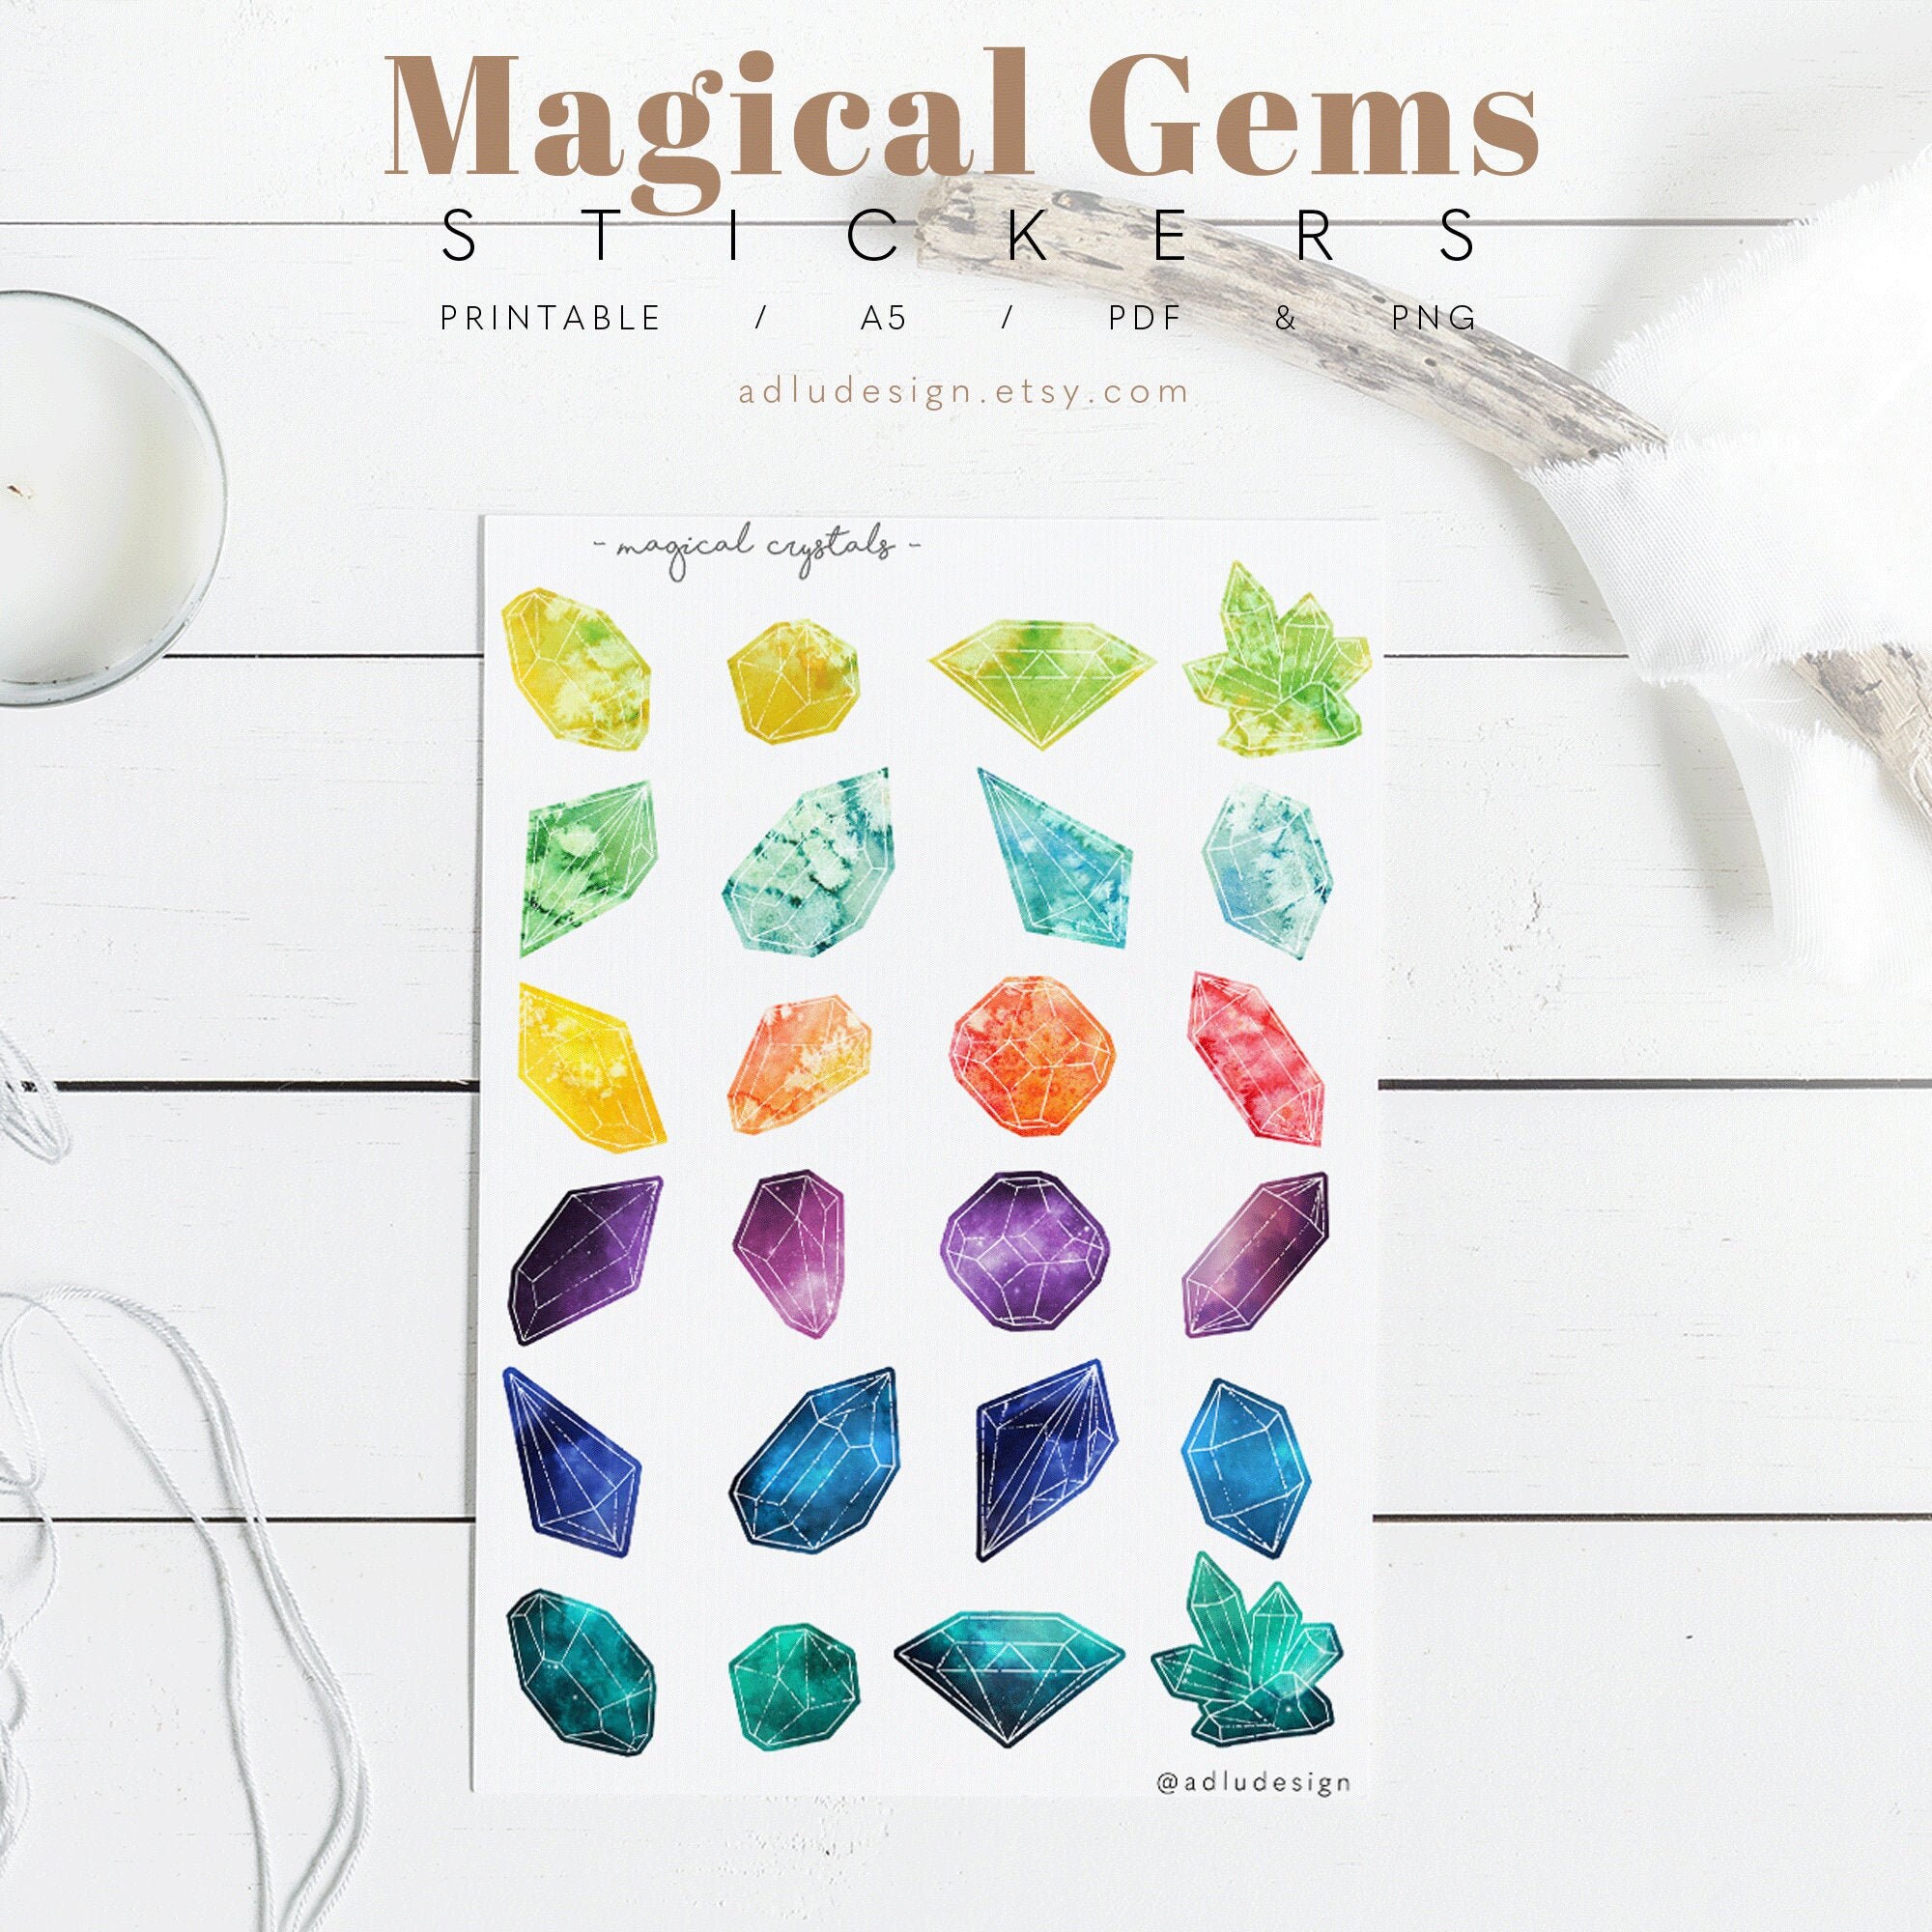 A4 Botanical Stickers for Journals and Planners Herbal Leaves 